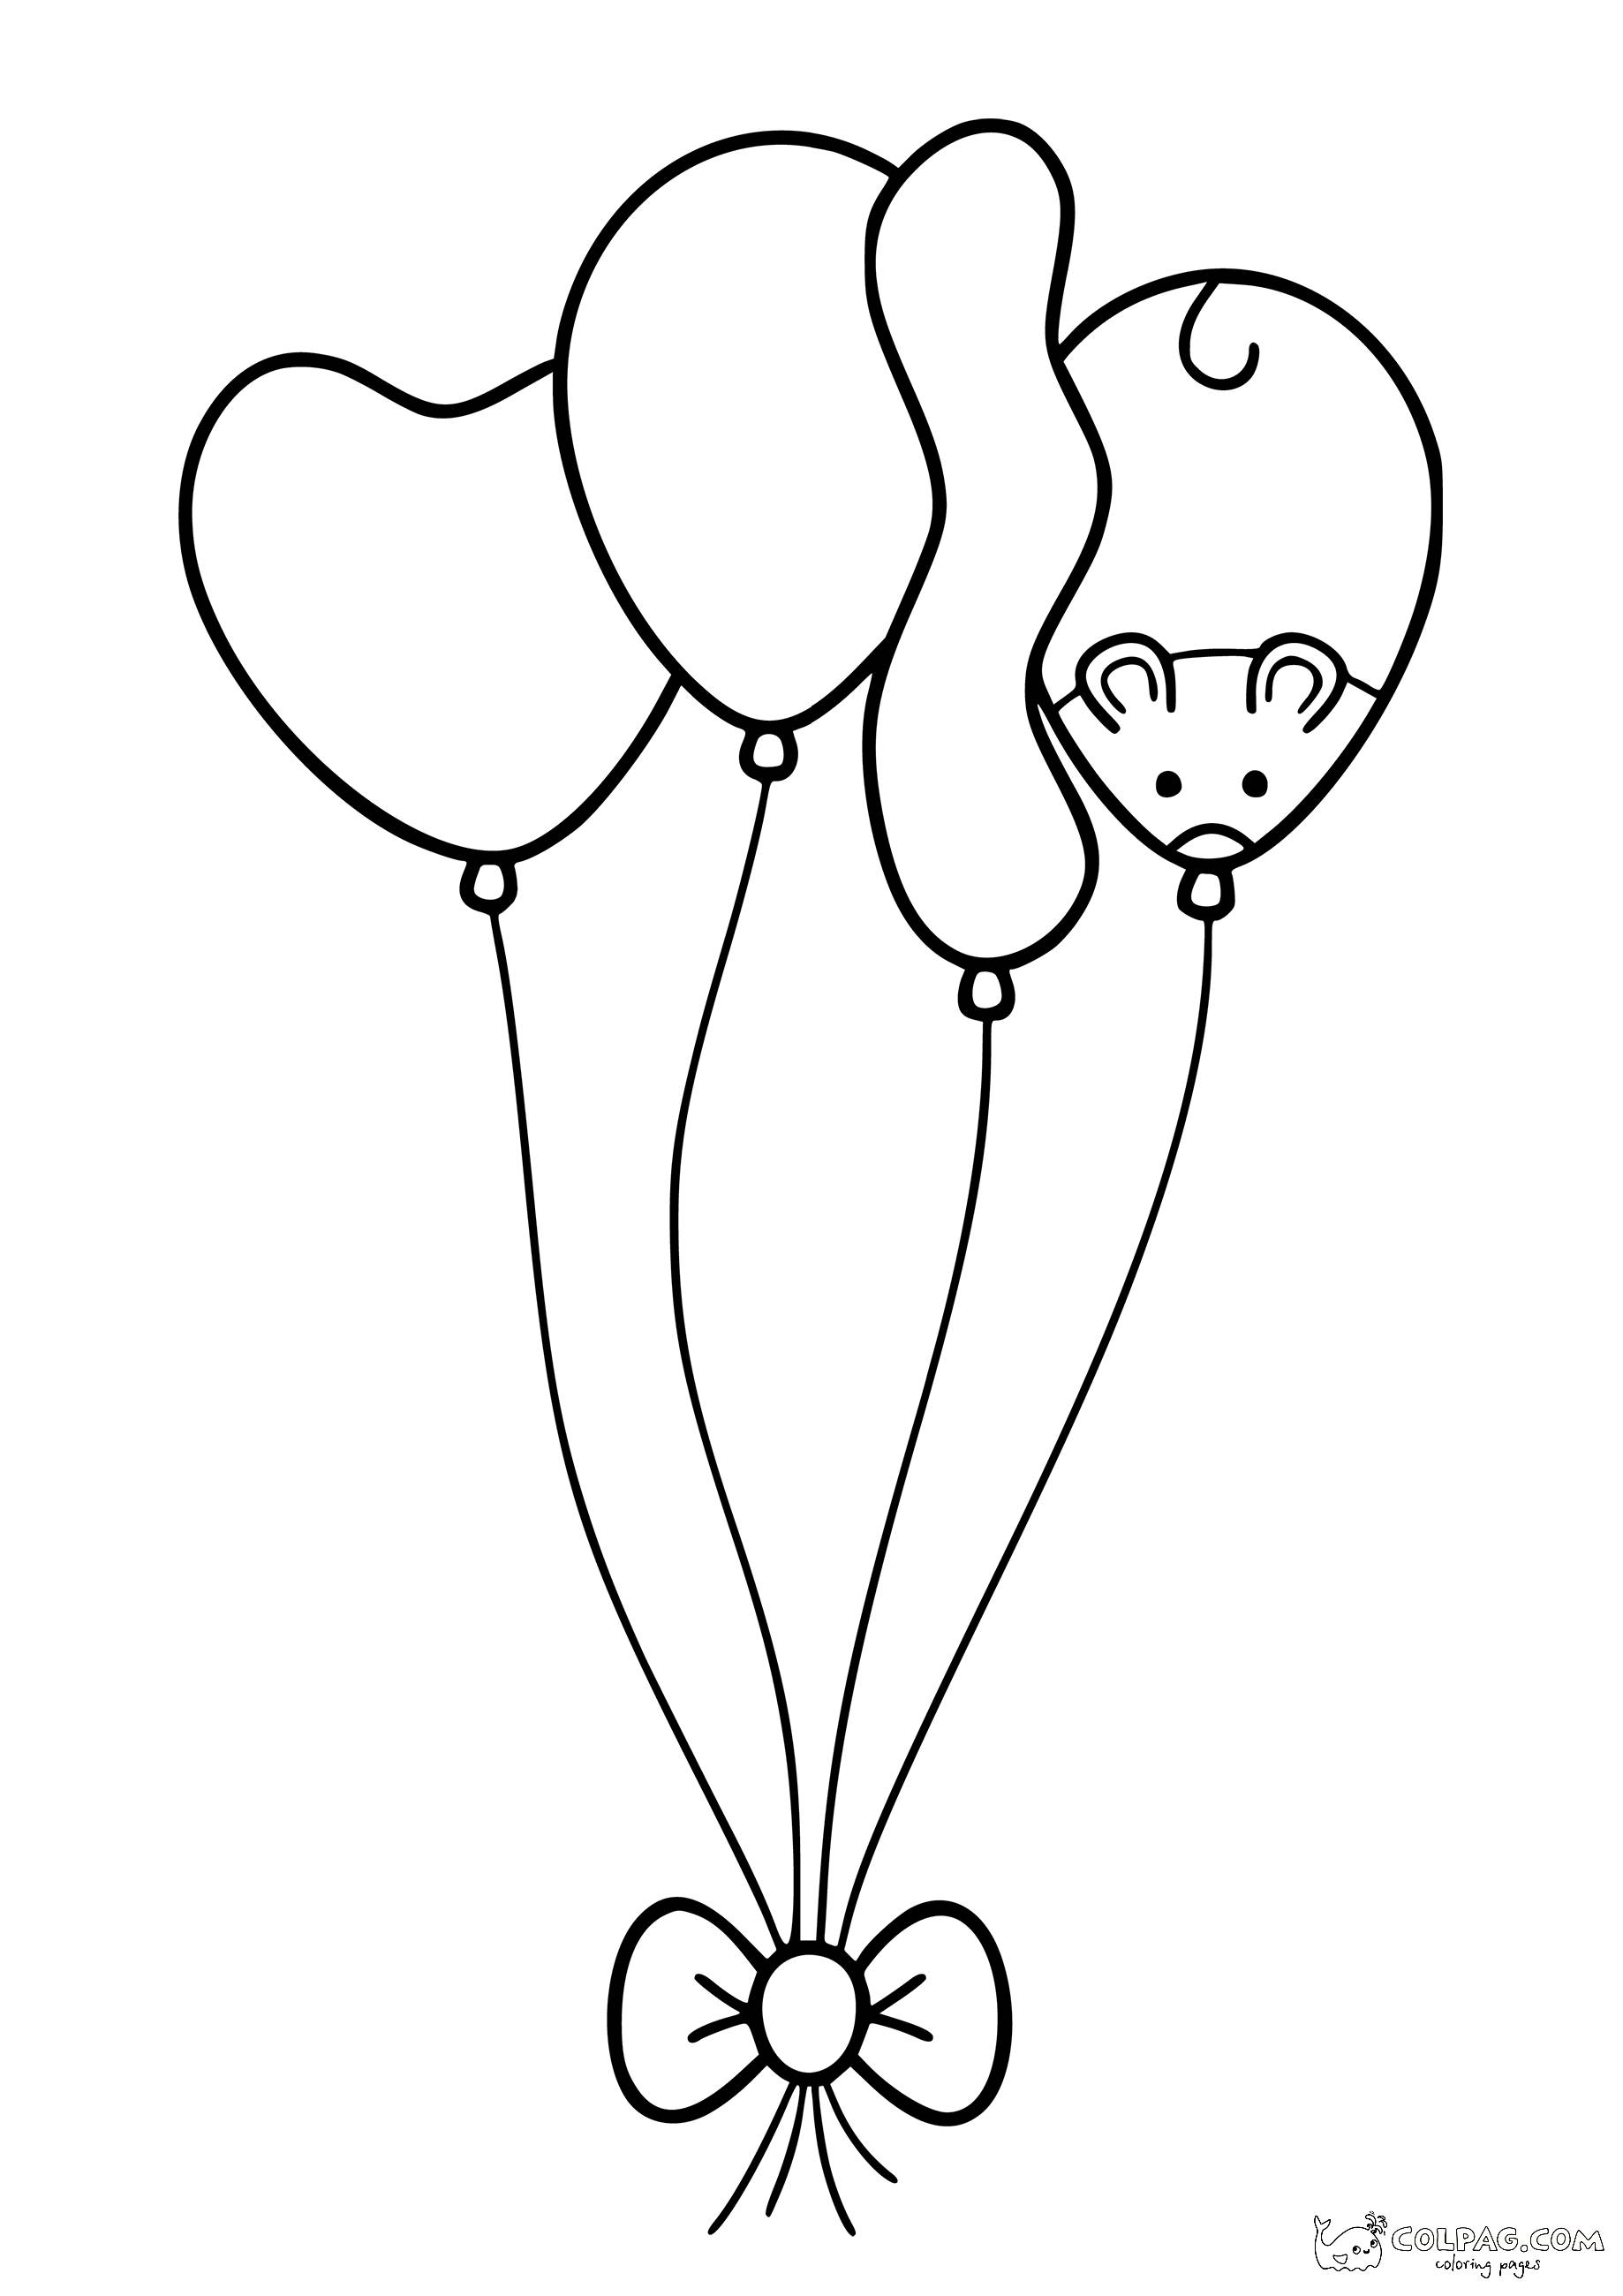 16-mouse-hiding-in-baloons-coloring-page-colpag-16